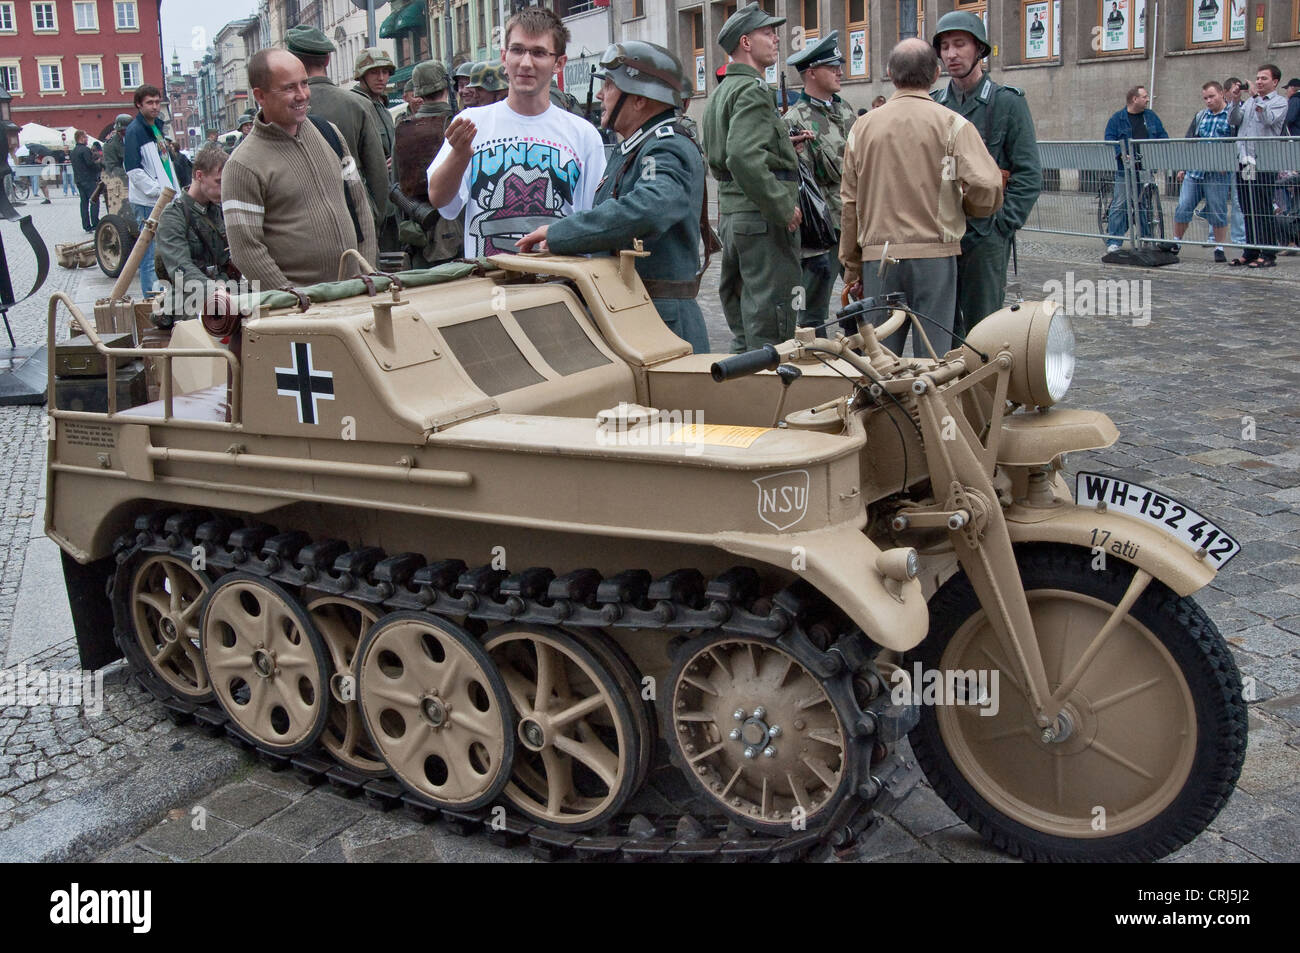 Kettenkrad, WW2 German half track light tractor, displayed after 1944 Warsaw Uprising re-enactment at Rynek in Wrocław, Poland Stock Photo